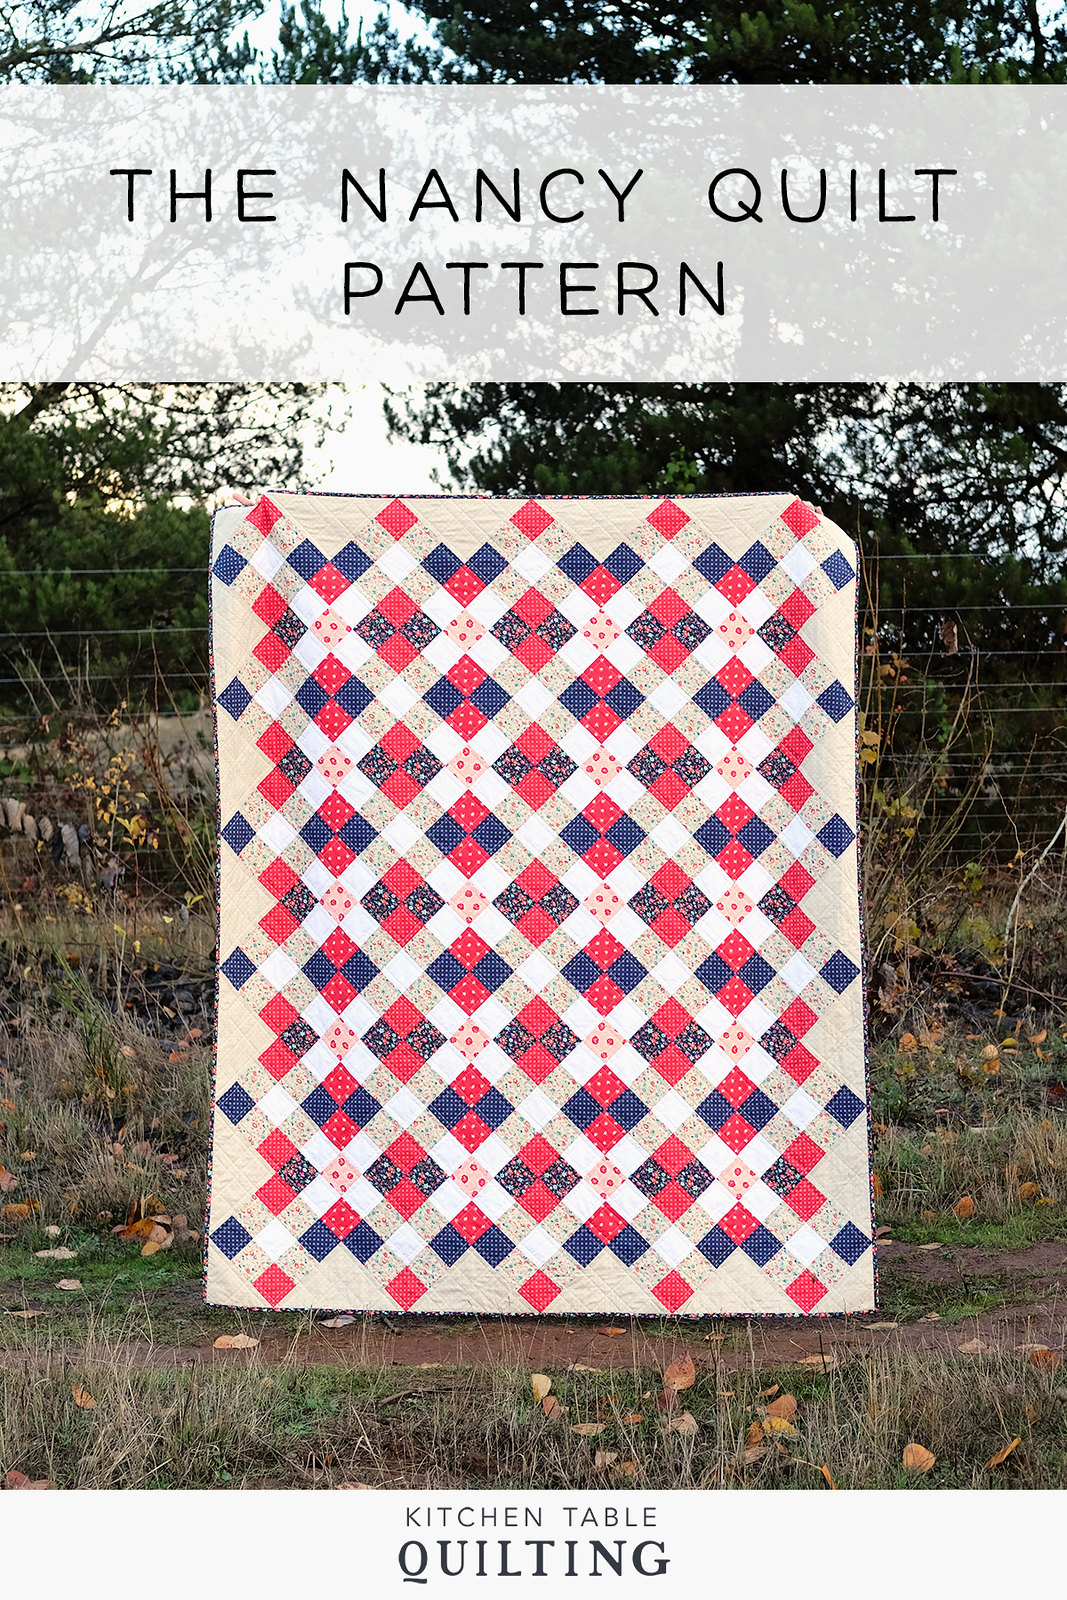 The Nancy Quilt Pattern - Kitchen Table Quilting